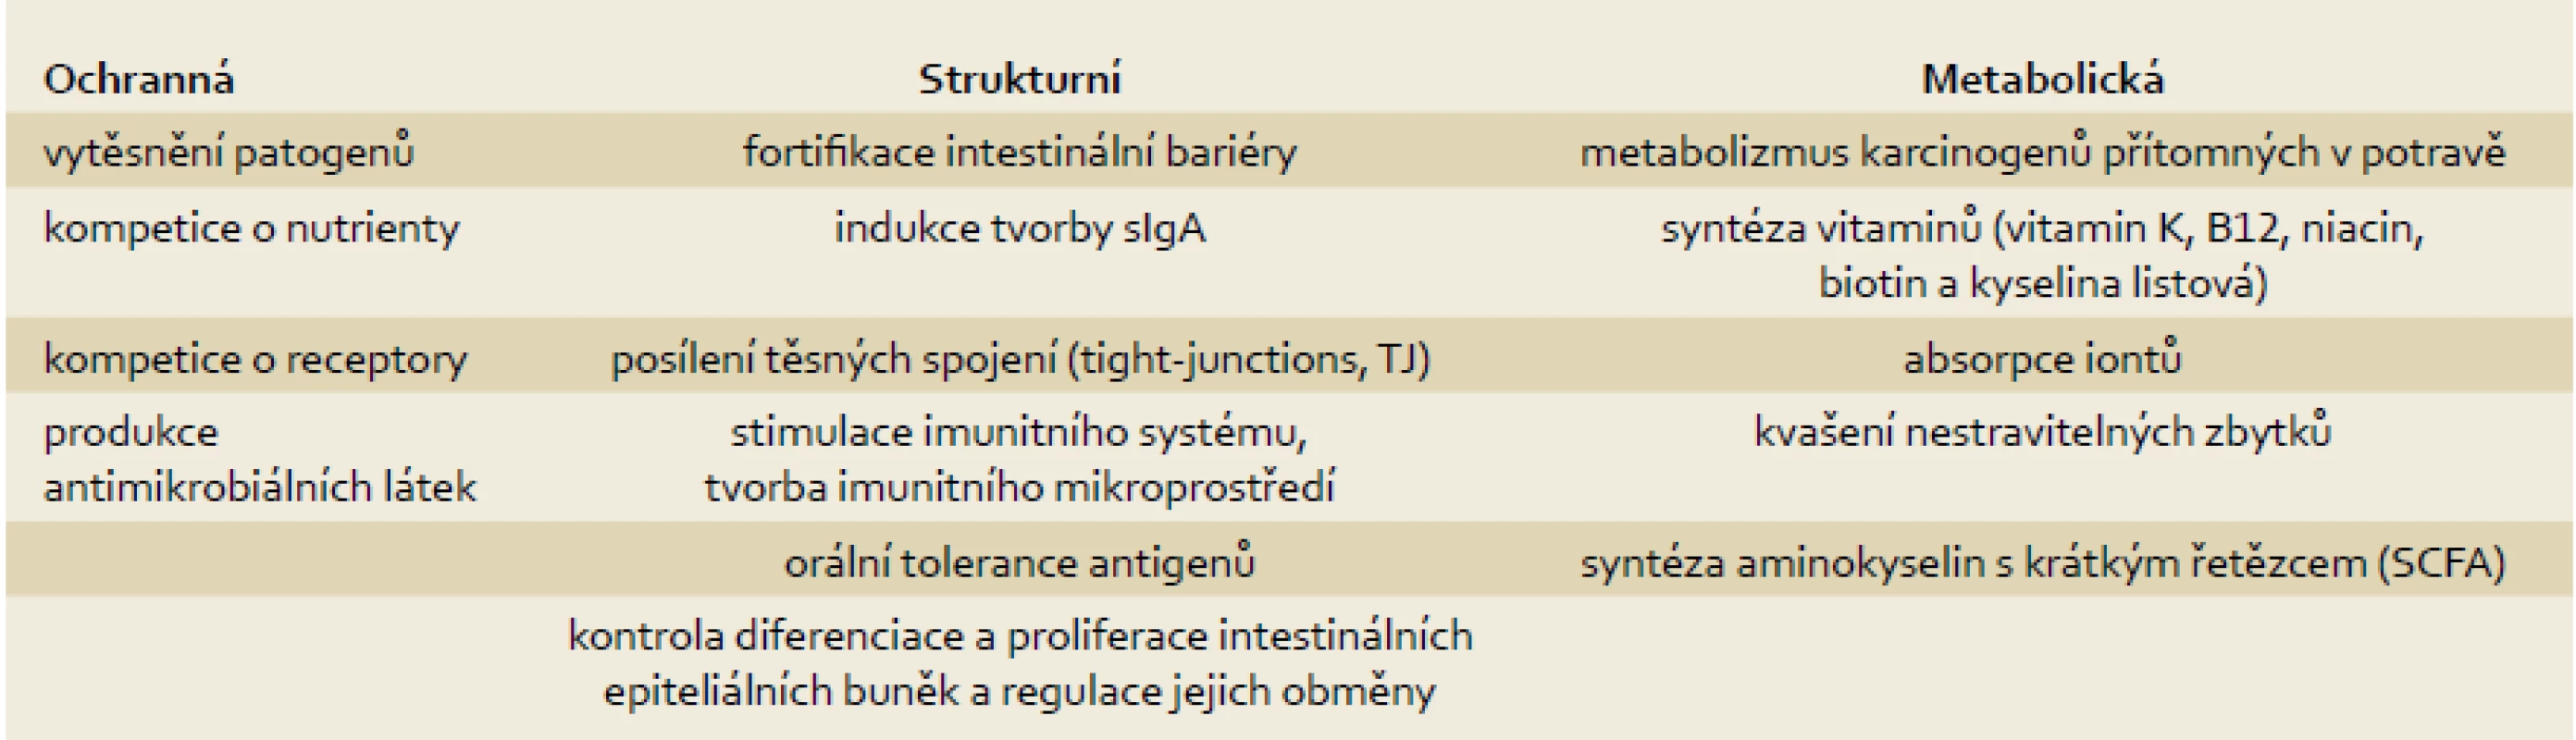 Funkce střevní mikroflóry, upraveno dle [8,9].
Tab. 1. The function of the intestinal microflora, adapted from [8,9].